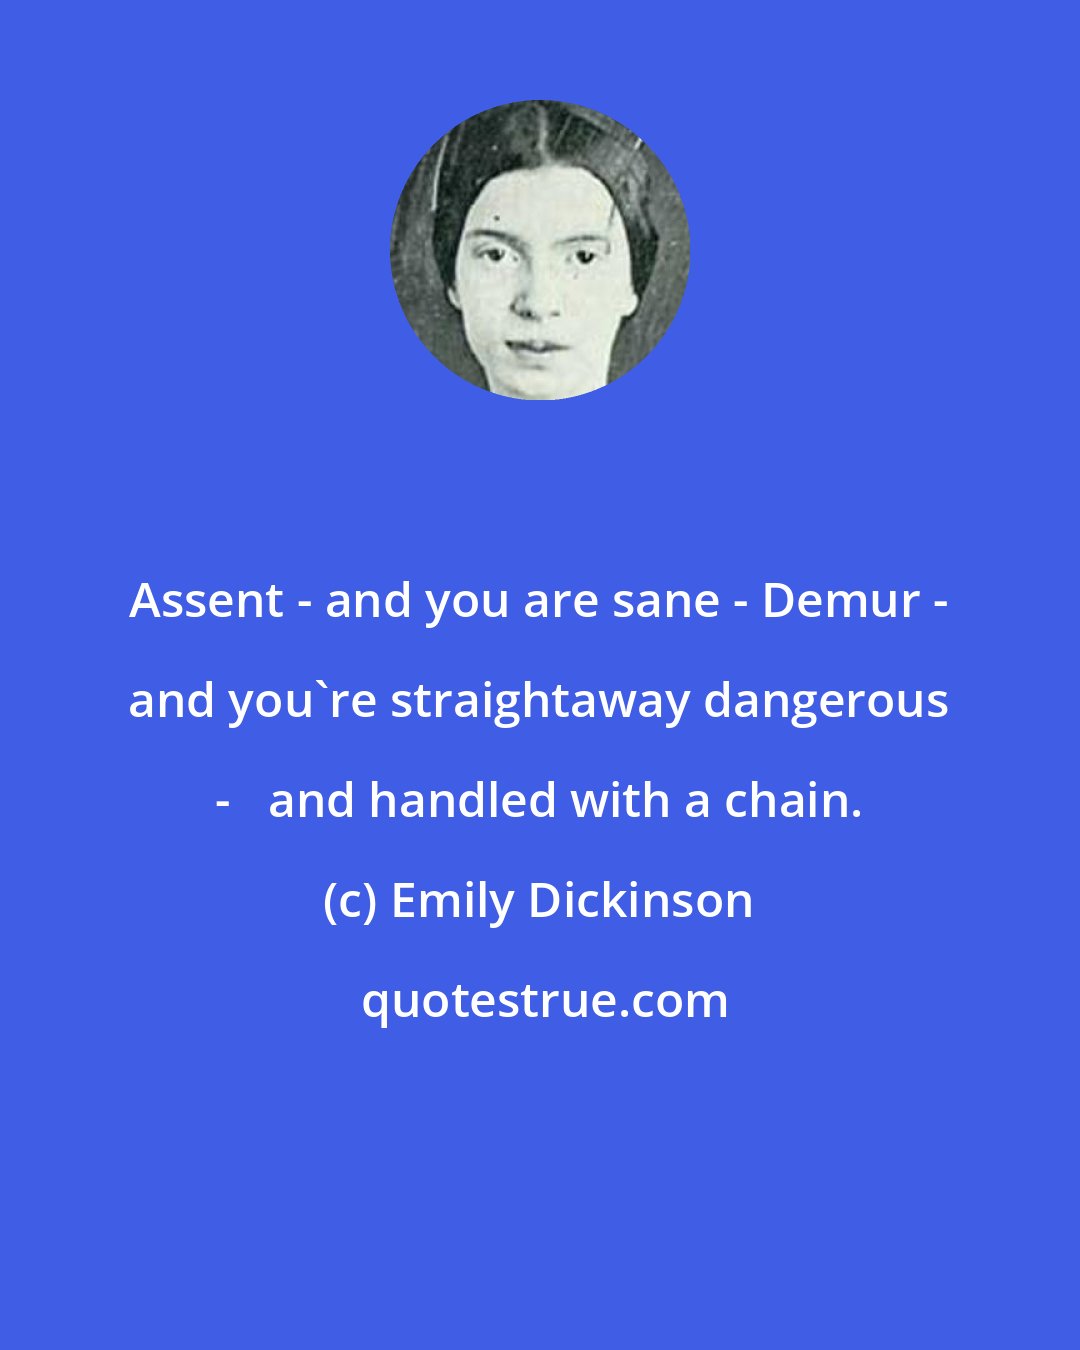 Emily Dickinson: Assent - and you are sane - Demur - and you're straightaway dangerous -   and handled with a chain.